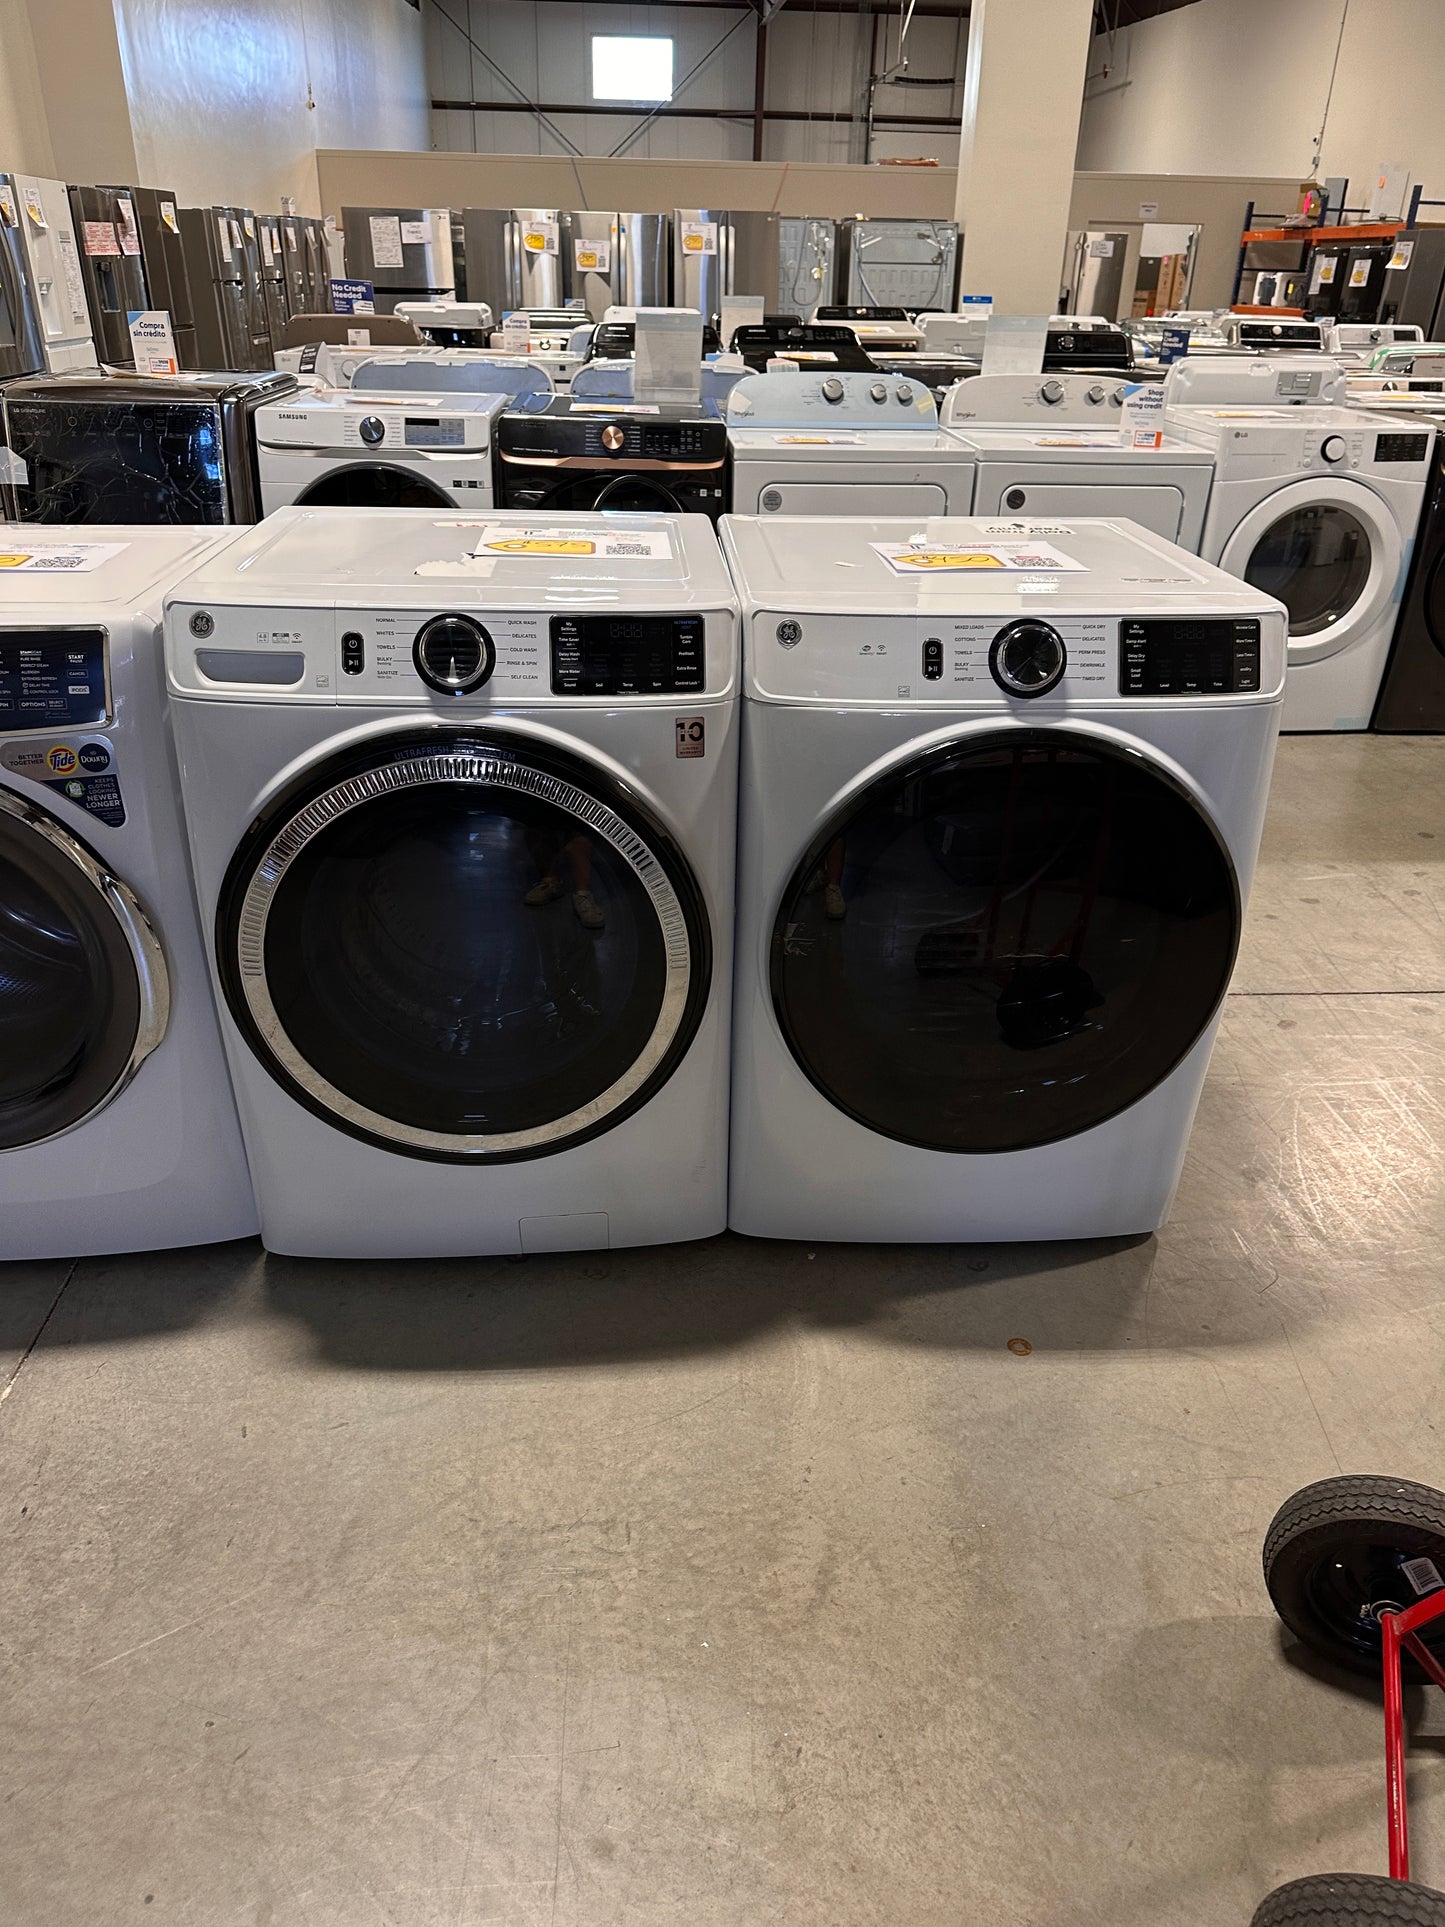 GORGEOUS NEW STACKABLE GE WASHER DRYER SET - WAS12904 DRY12366